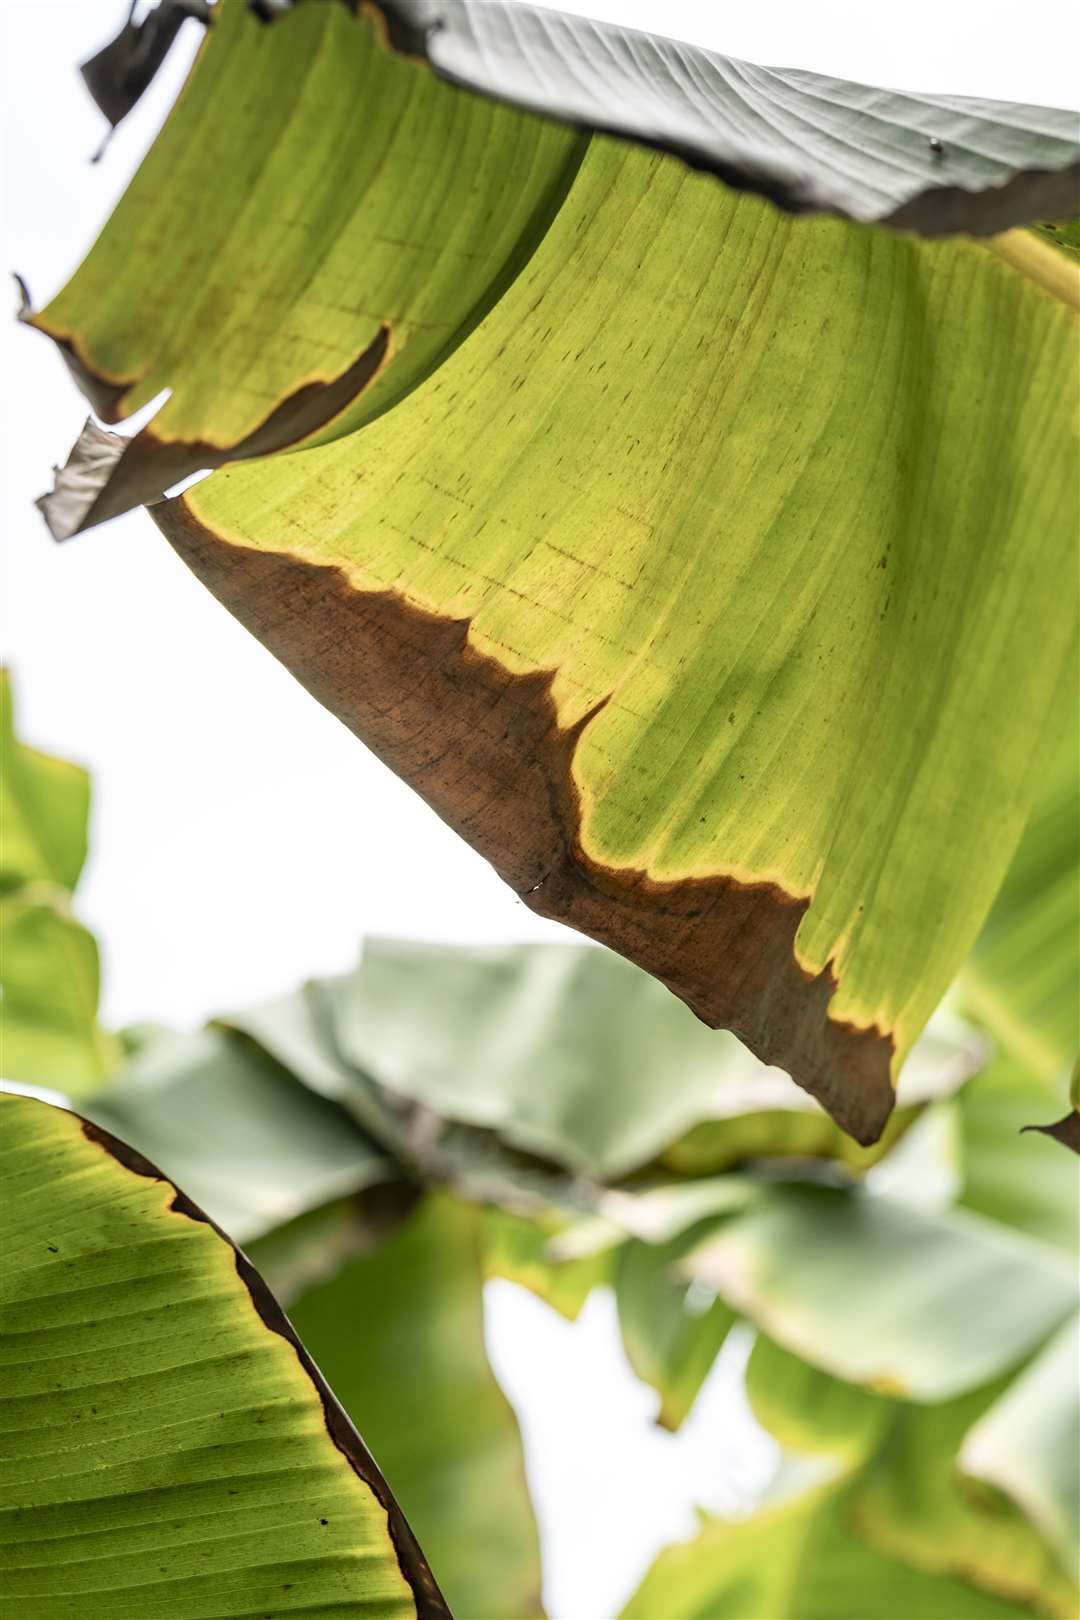 Singed banana leaves on a farm in Columbia (Chris Terry/PA)